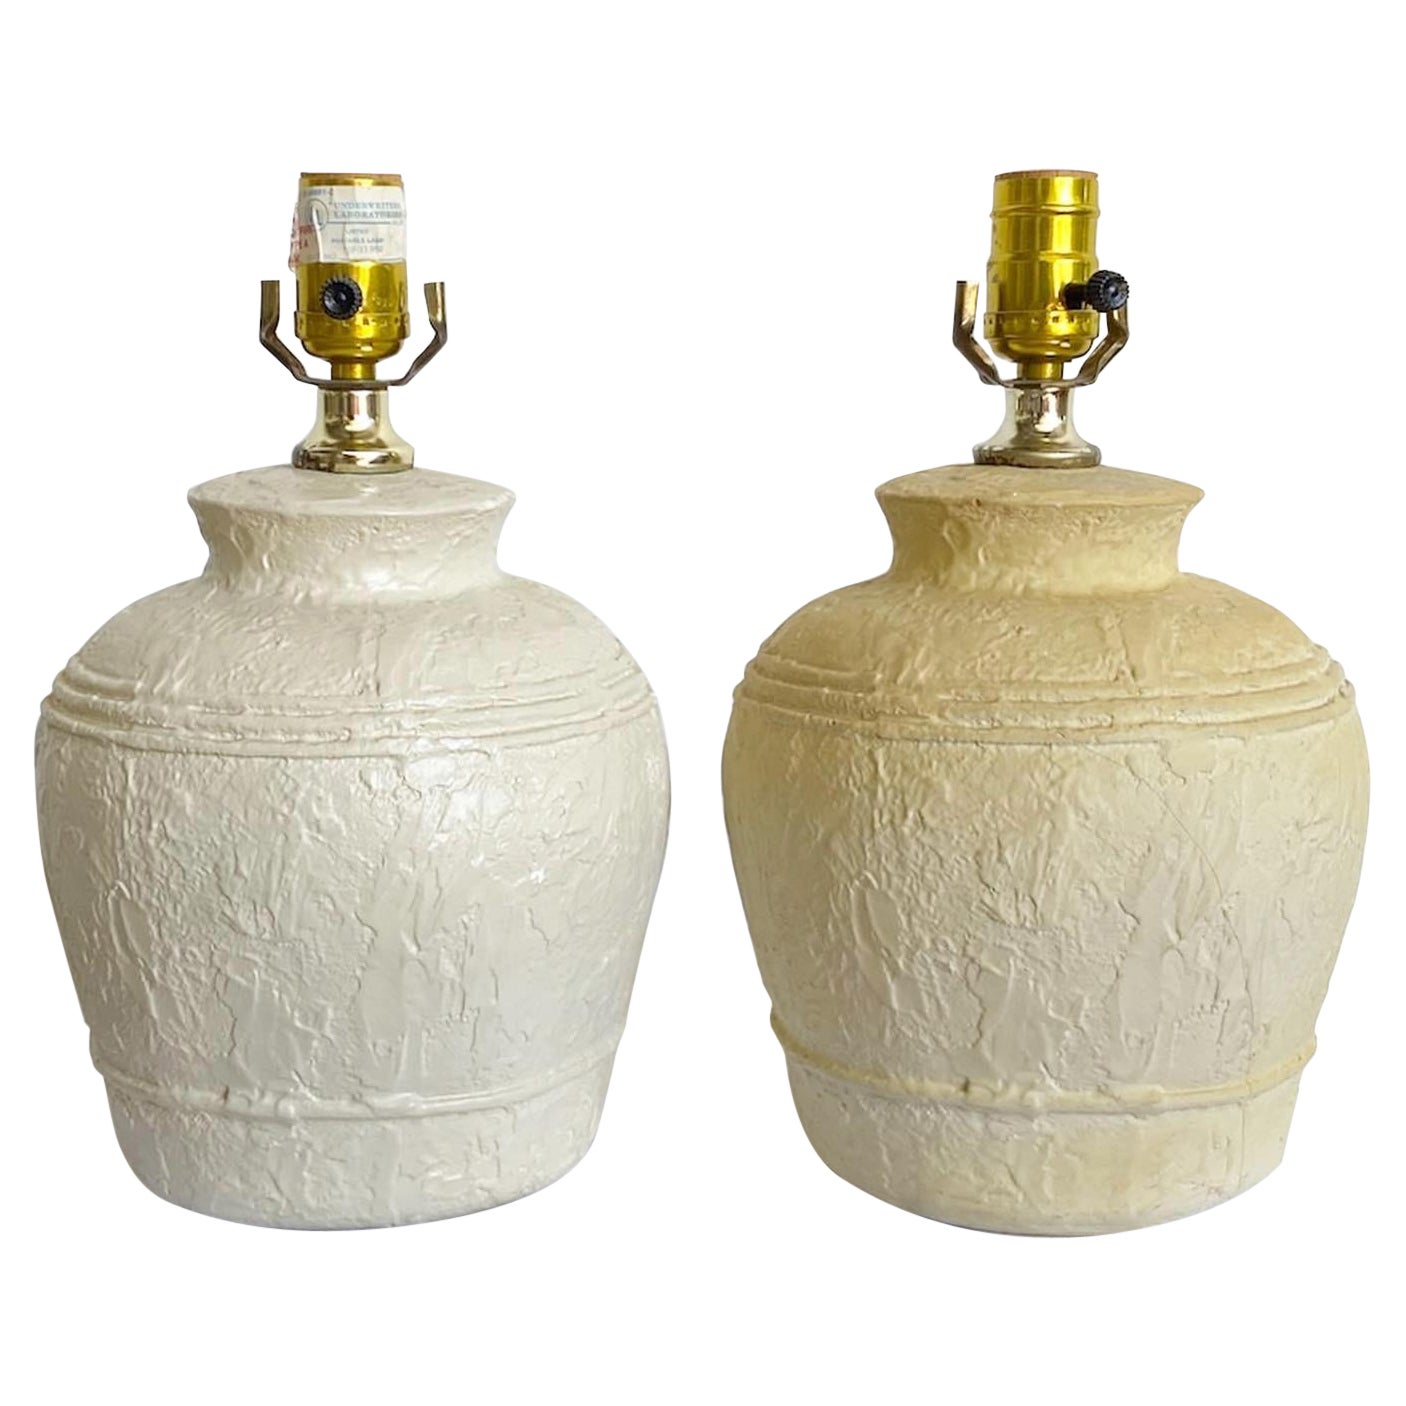 Postmodern Textured Plaster Ginger Jar Table Lamps - a Pair